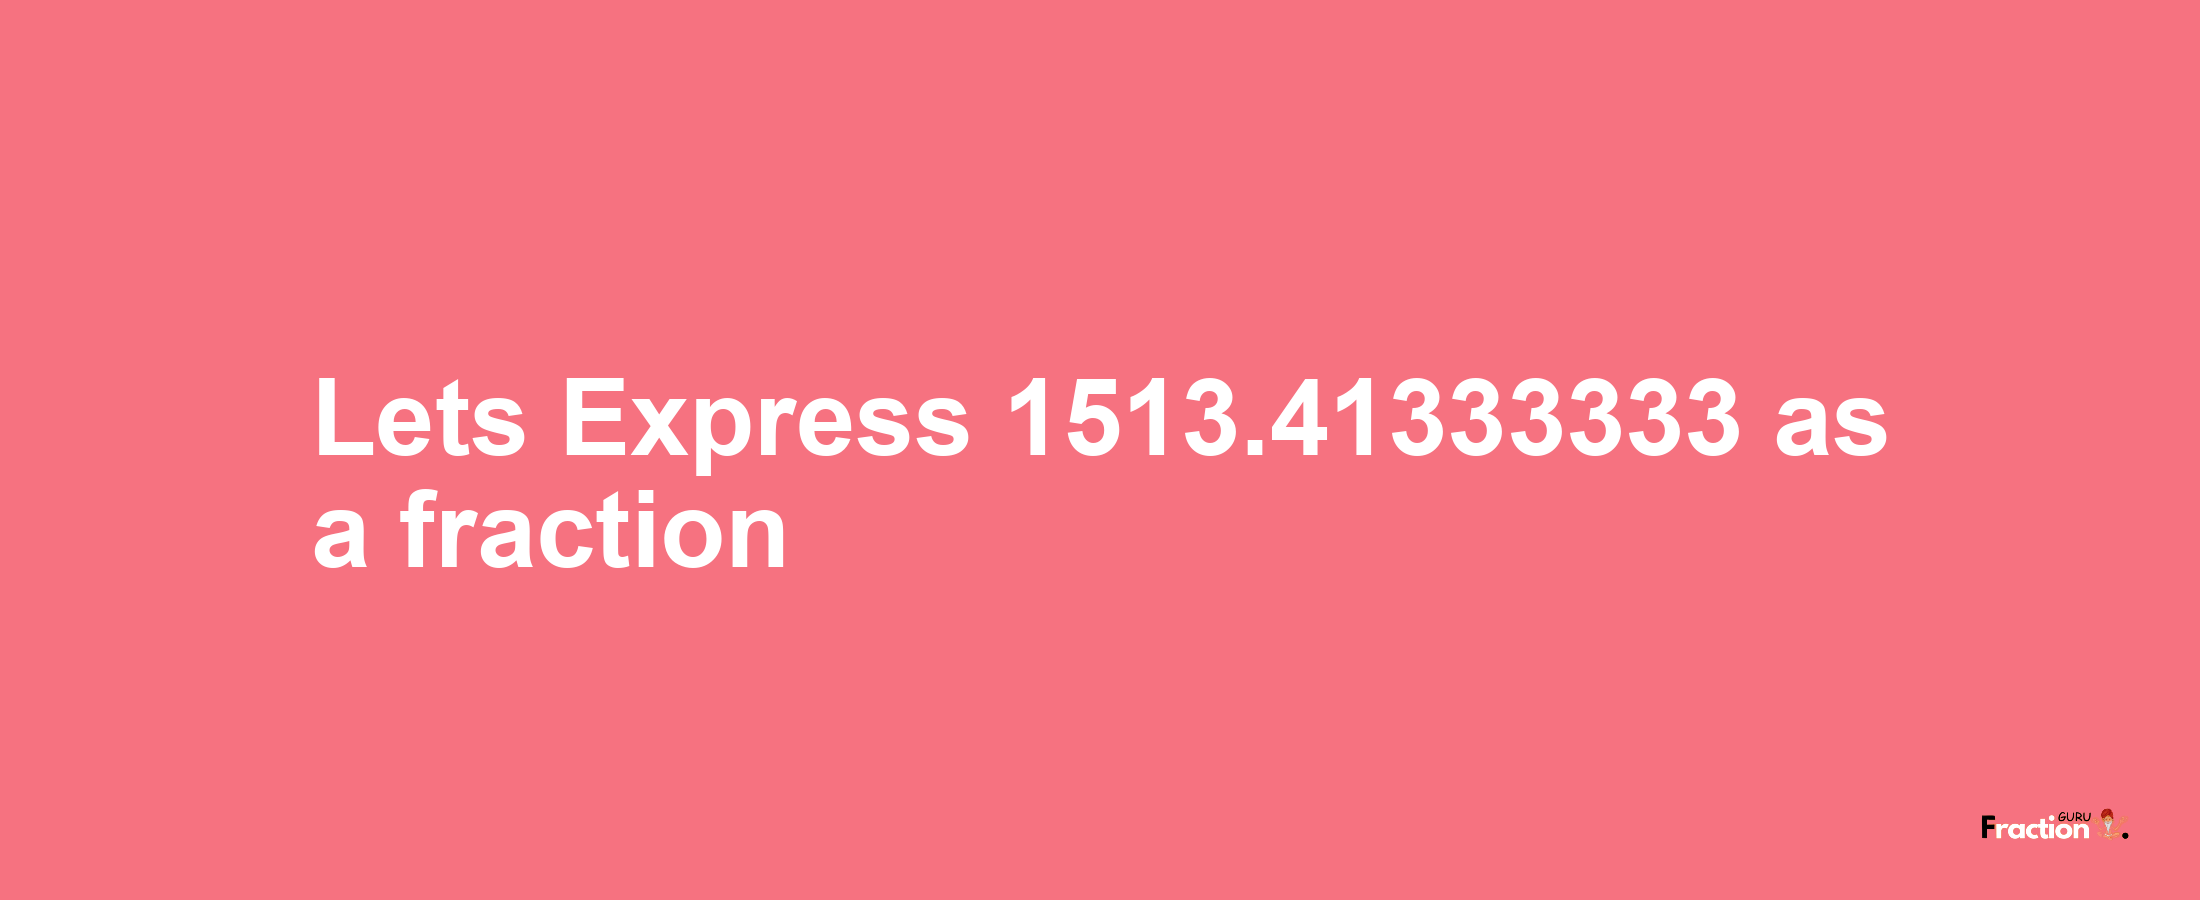 Lets Express 1513.41333333 as afraction